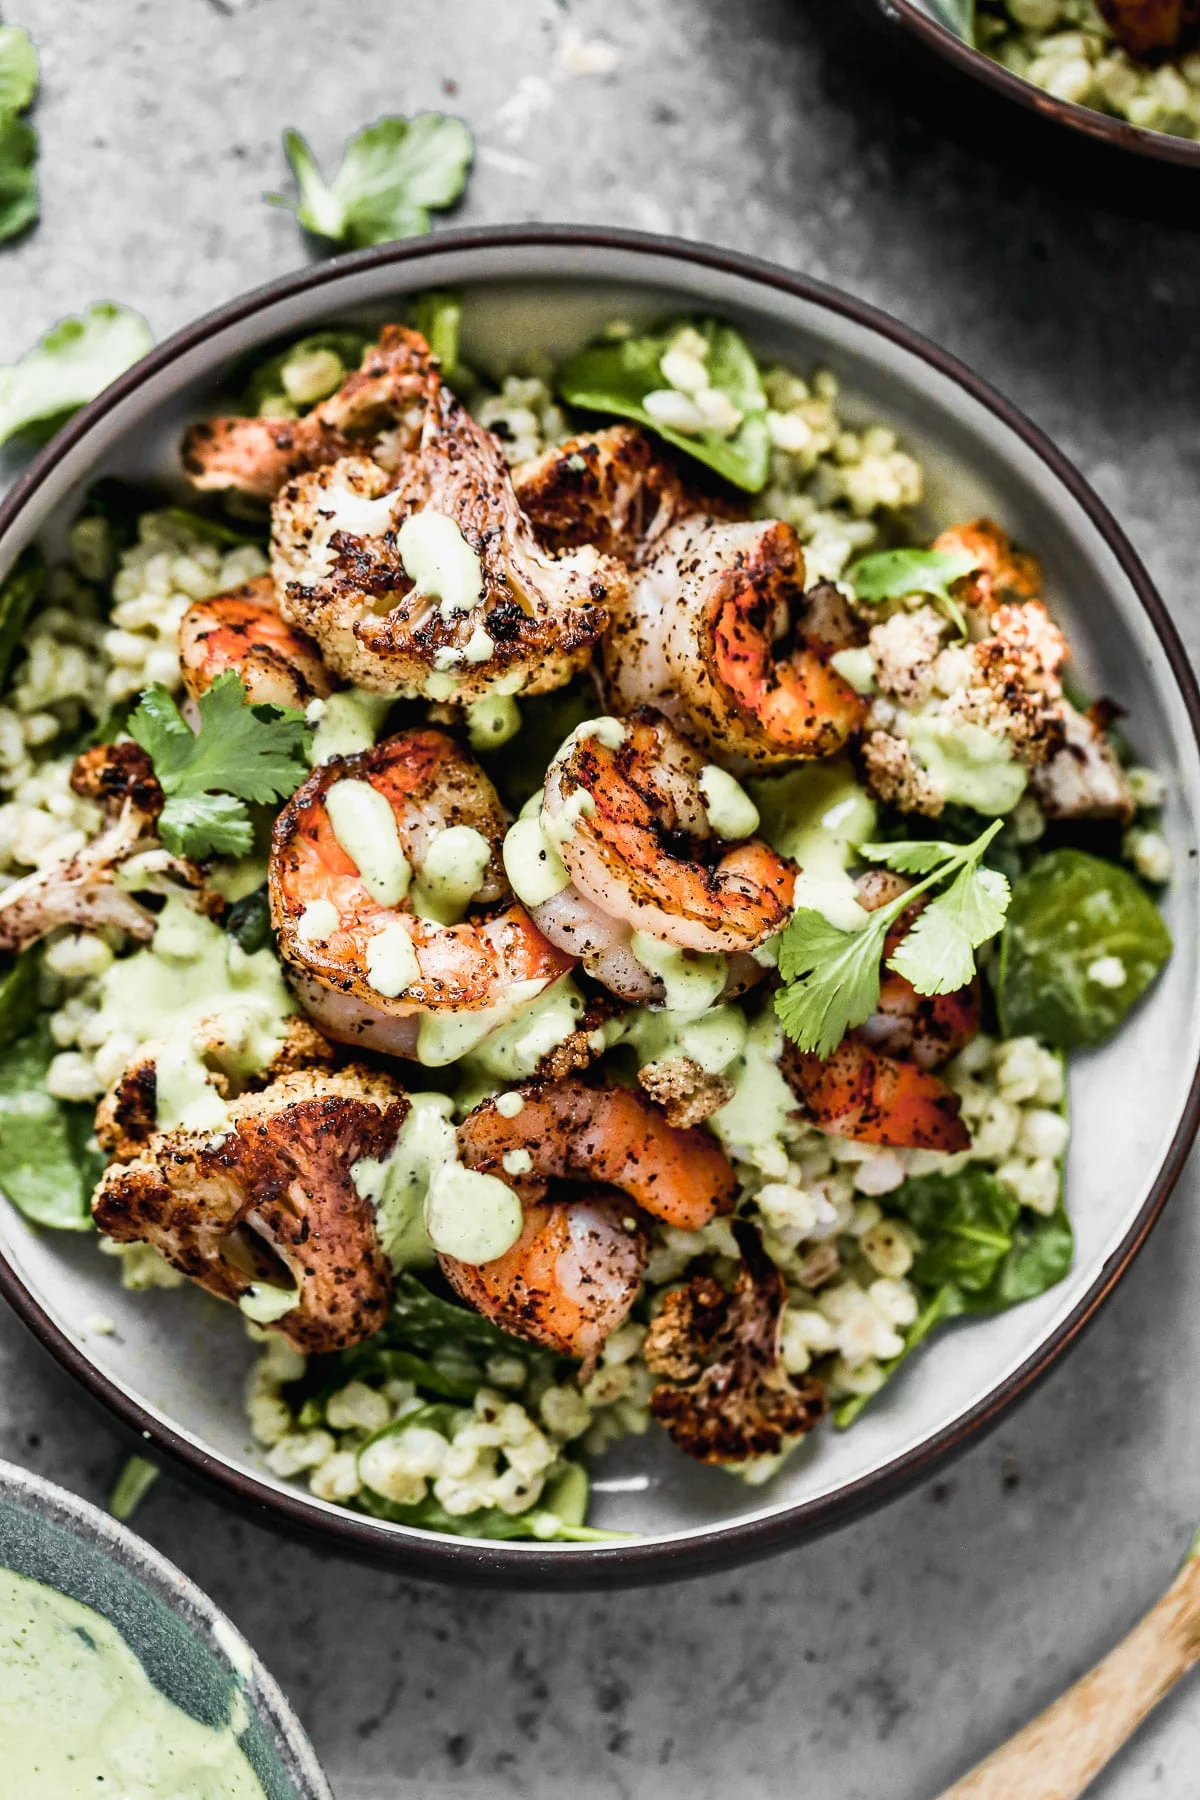 Nutty barley tossed in a zippy green tahini sauce, lemony sumac-roasted cauliflower and shrimp, and pops of crunchy pine nuts are the makings of our Green Tahini Shrimp Bowls - our new favorite way to do healthy. Make everything and serve the day of or pack it up and keep in the fridge to serve thought the week.&nbsp;